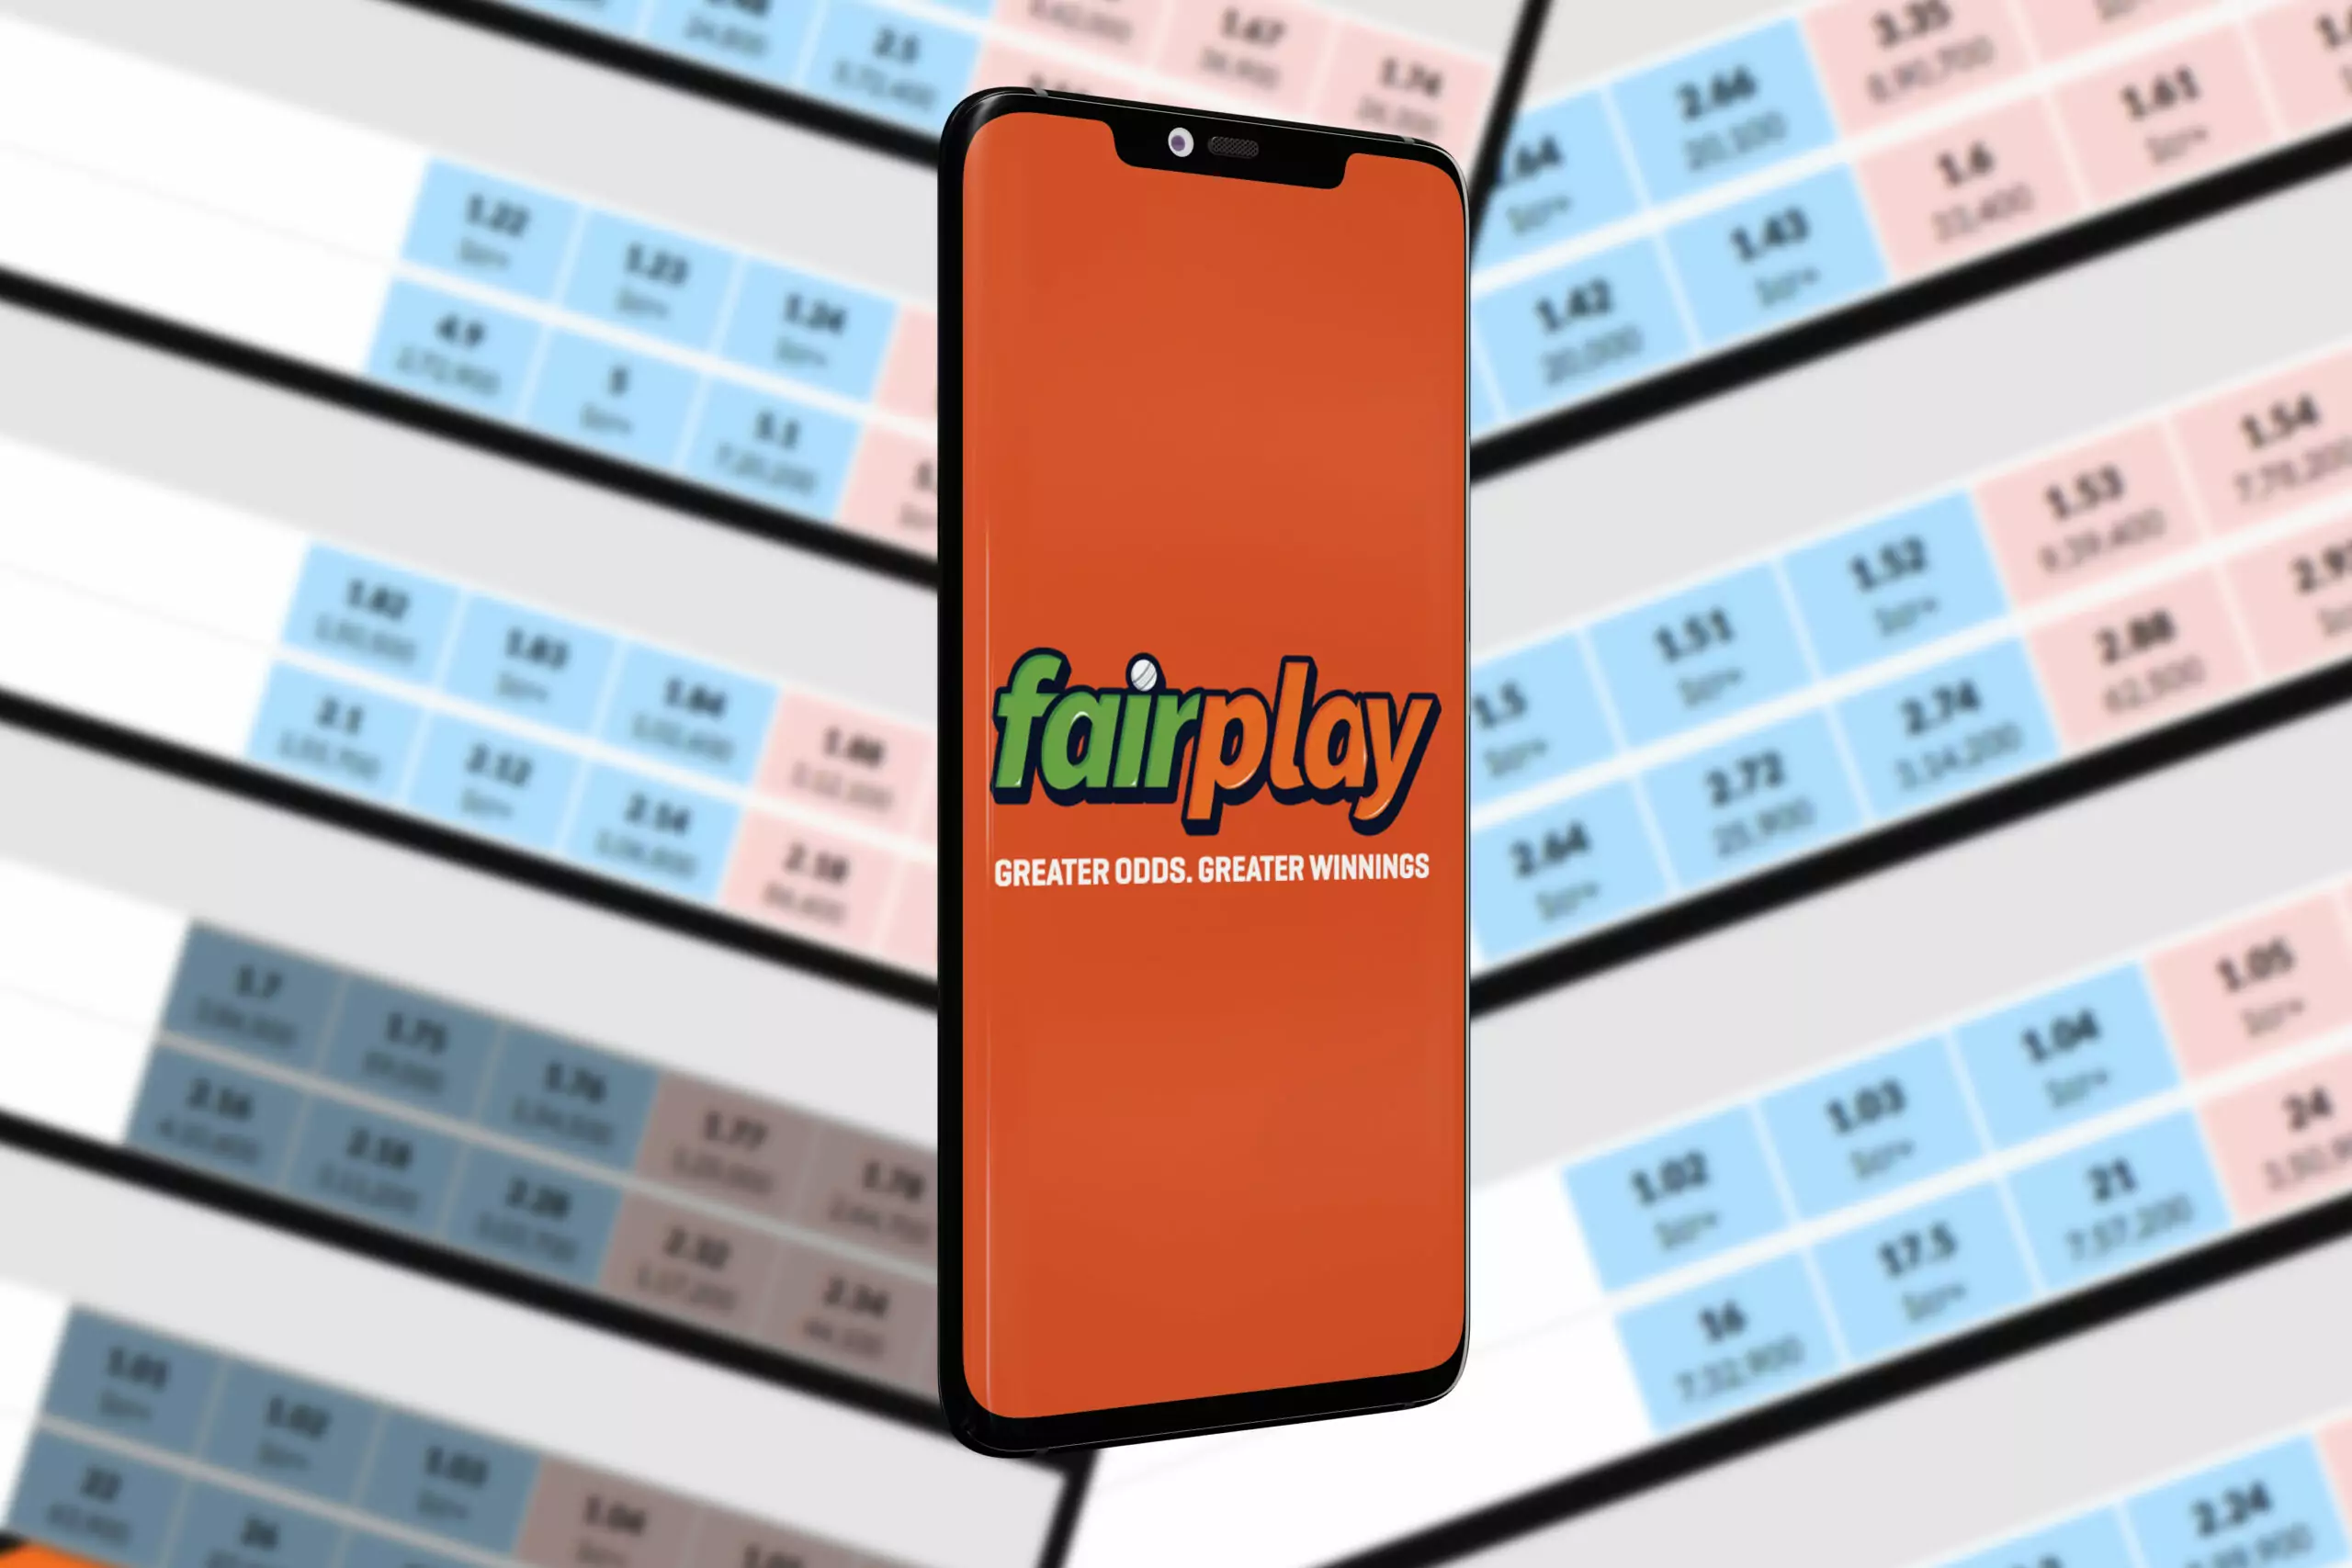 The Fairplay app supports many types of sports betting.